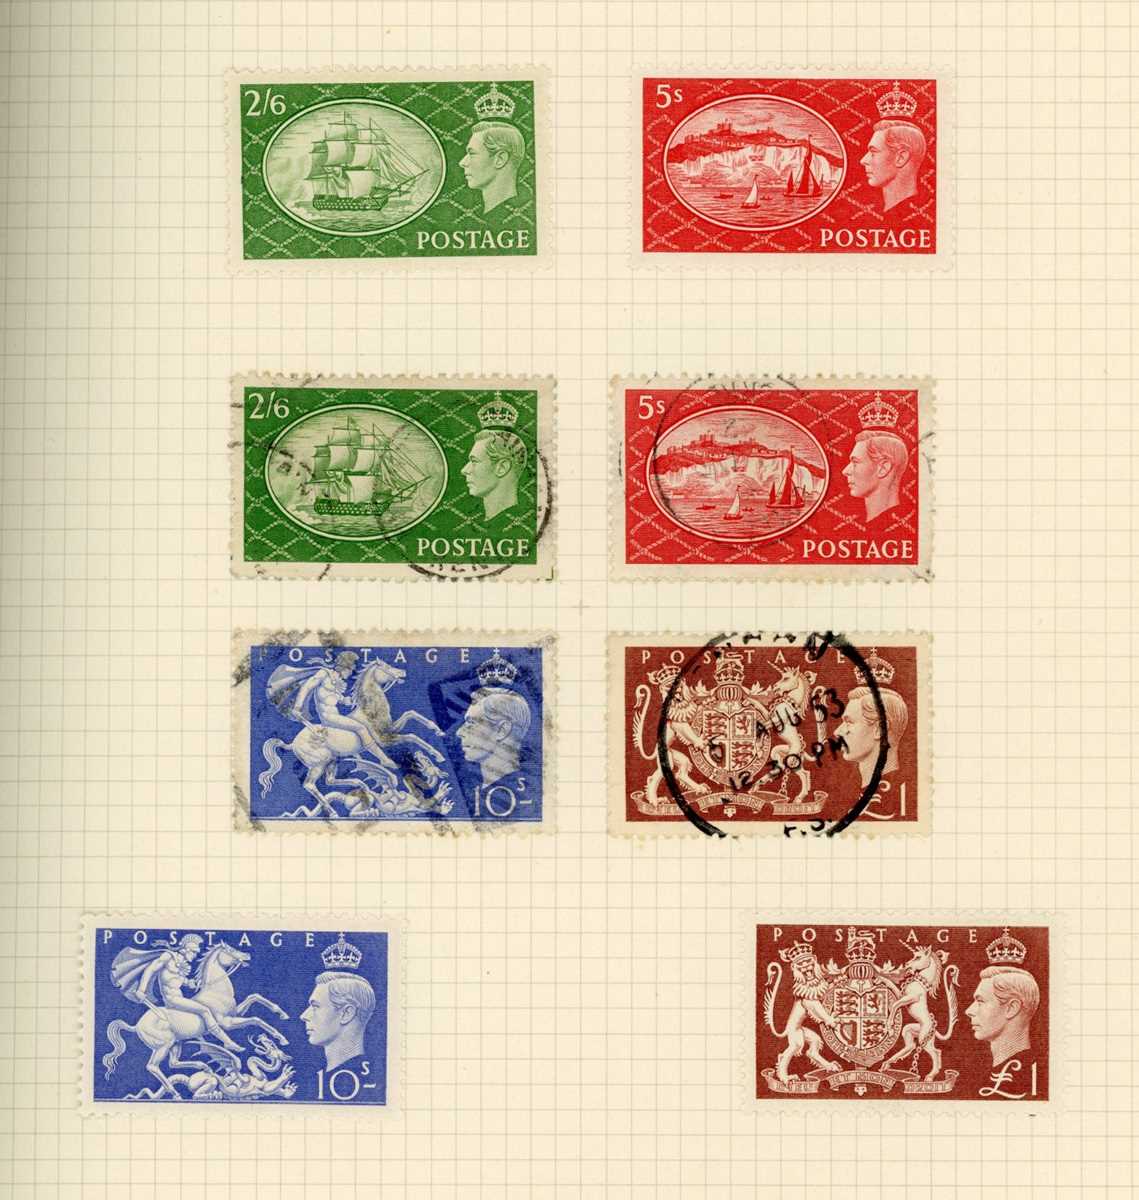 Great Britain stamps in album from 1840 1d black and 2d blue used up to 1972 with surface printed, - Image 9 of 10